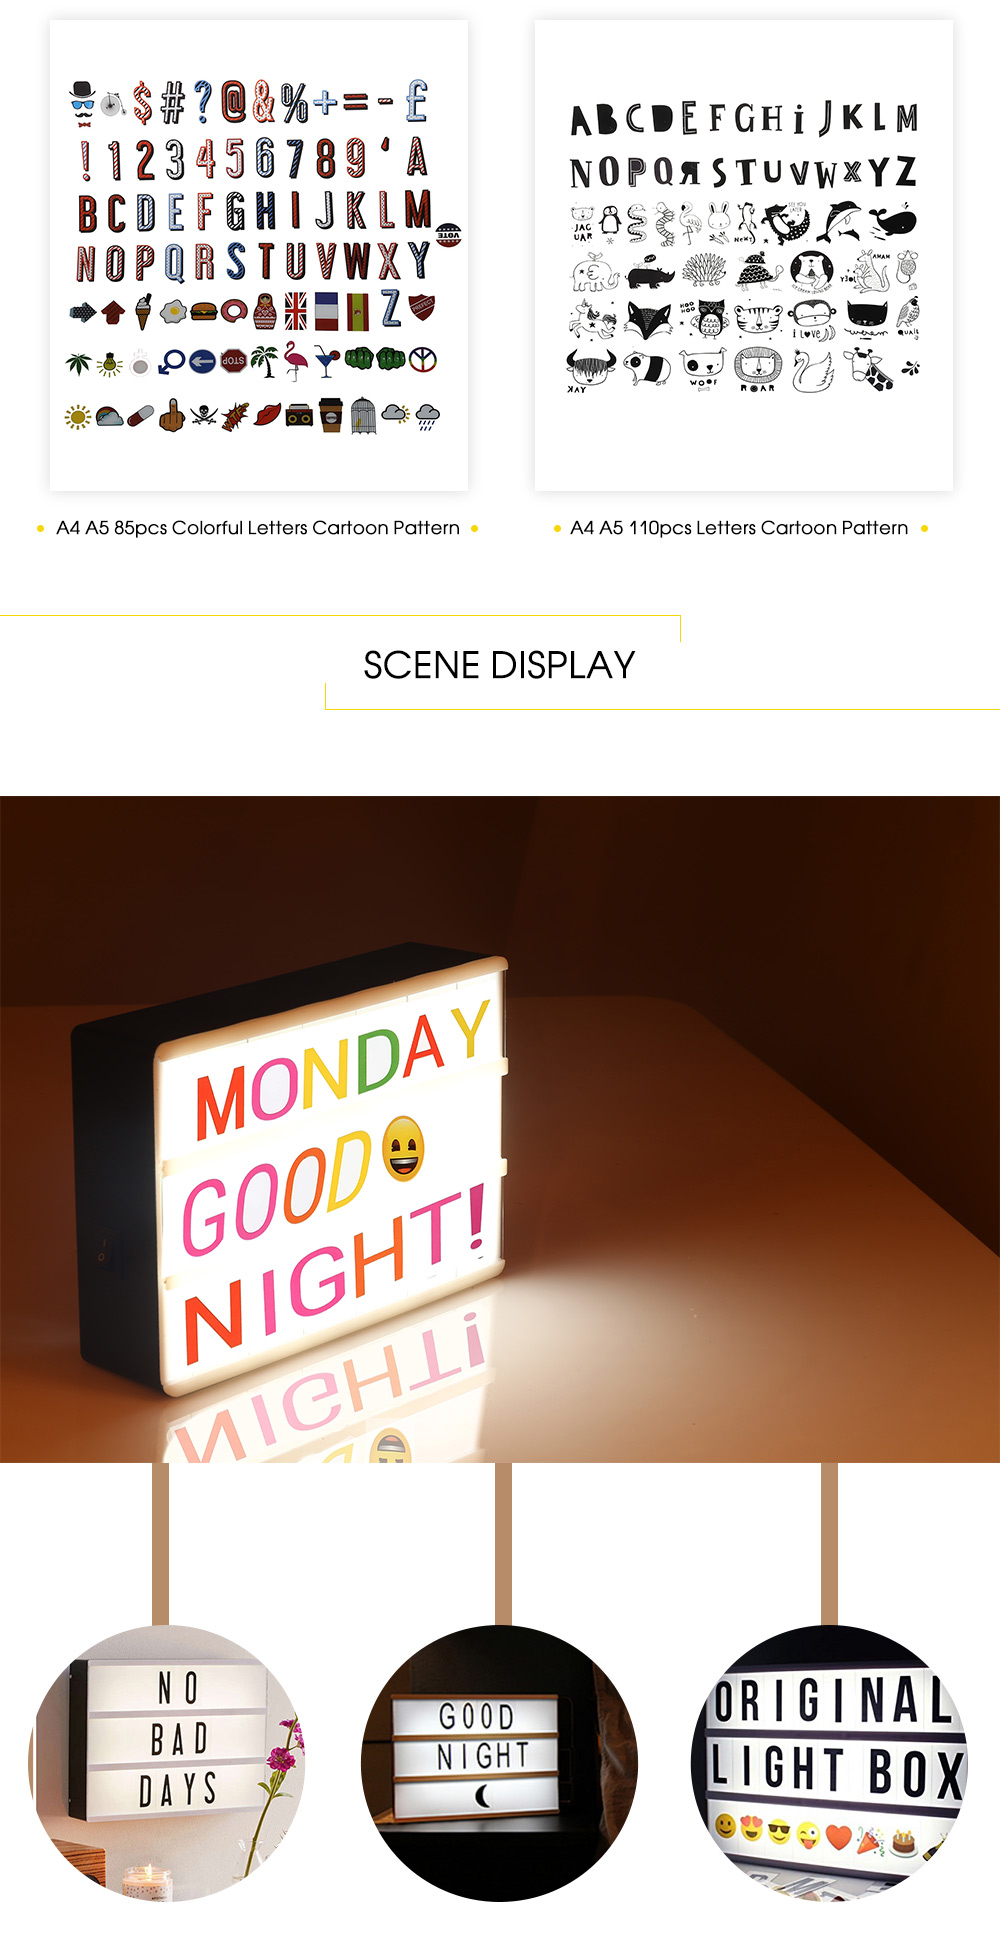 Creative Free Combination Cards for LED Night Light Box